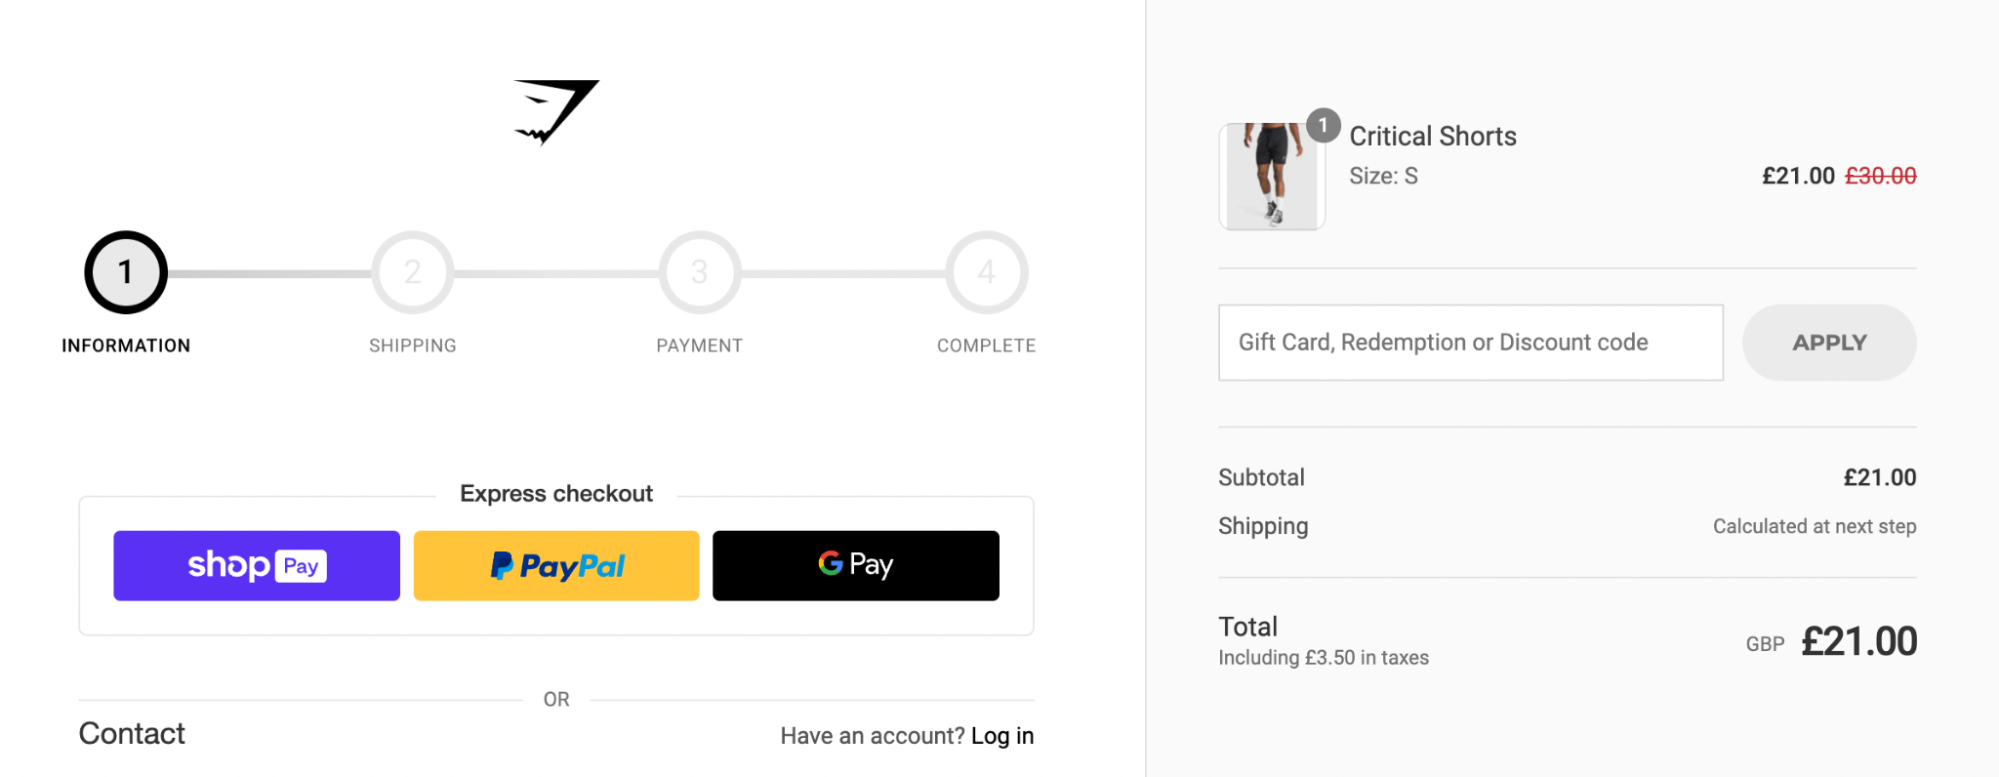 Gymshark’s UK online store showing a £21 product in the cart.